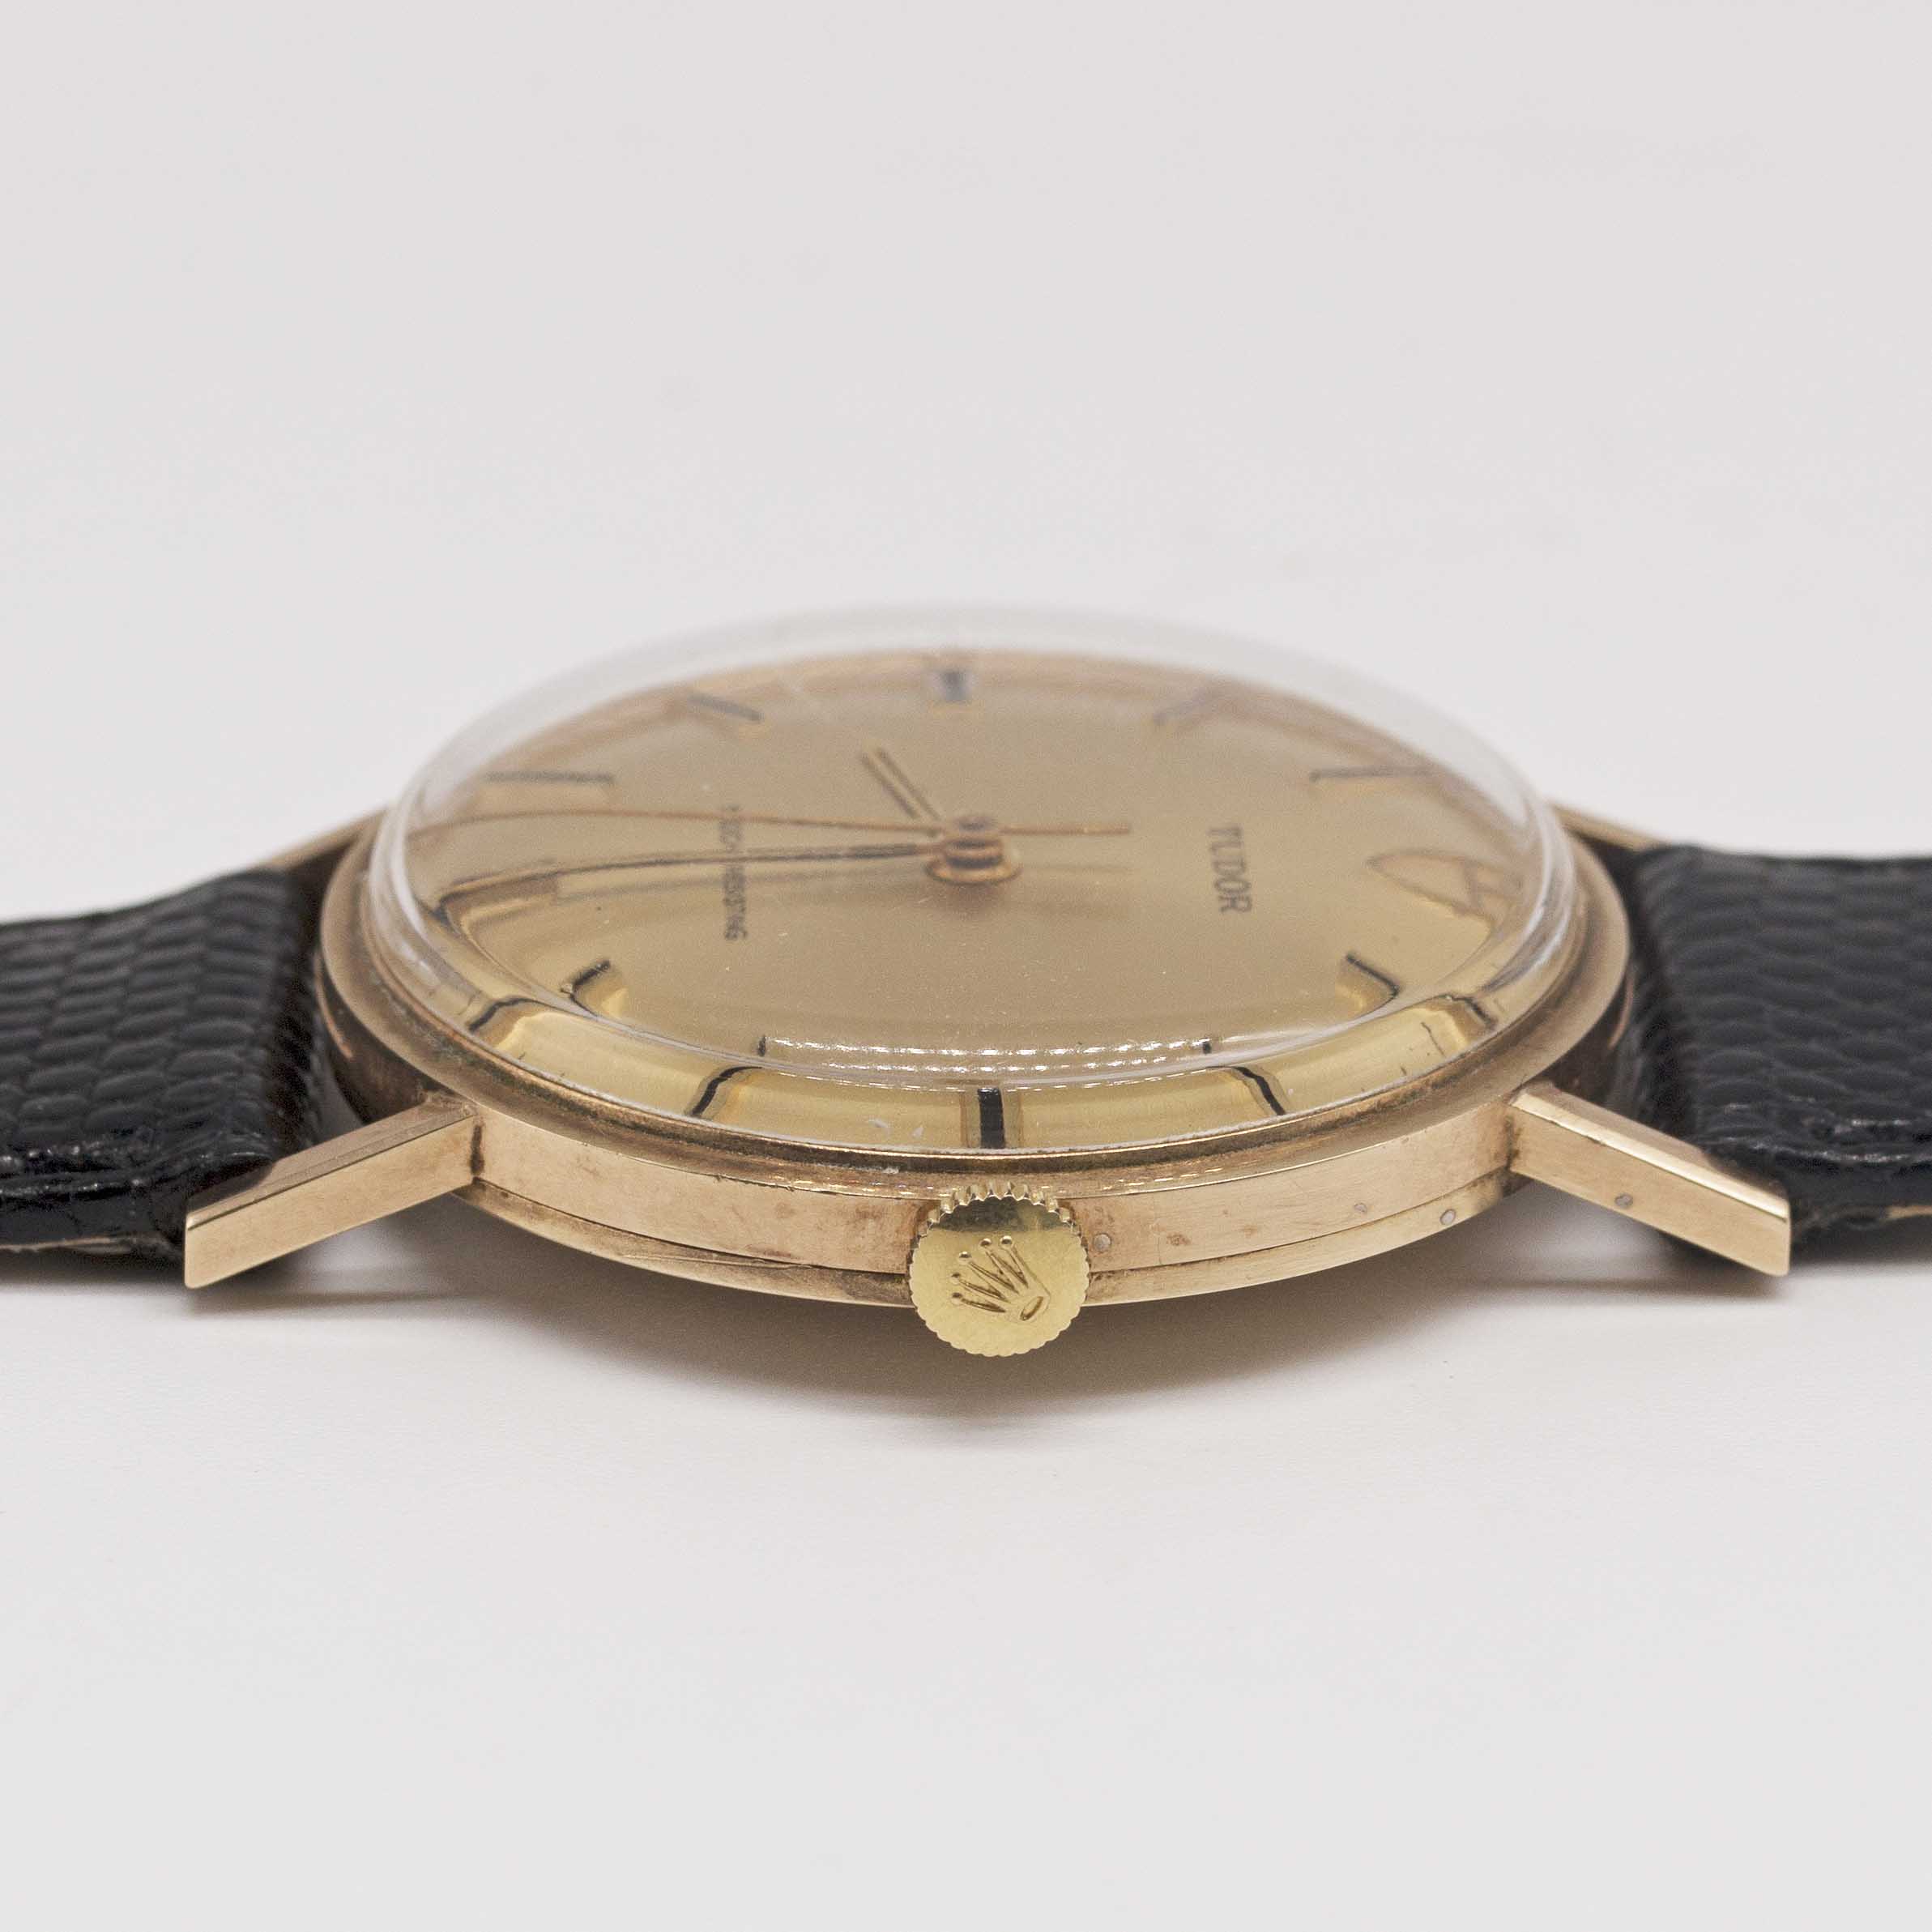 A GENTLEMAN'S 9CT SOLID GOLD ROLEX TUDOR SHOCK RESISTING WRIST WATCH CIRCA 1969, WITH CHAMPAGNE - Image 7 of 10